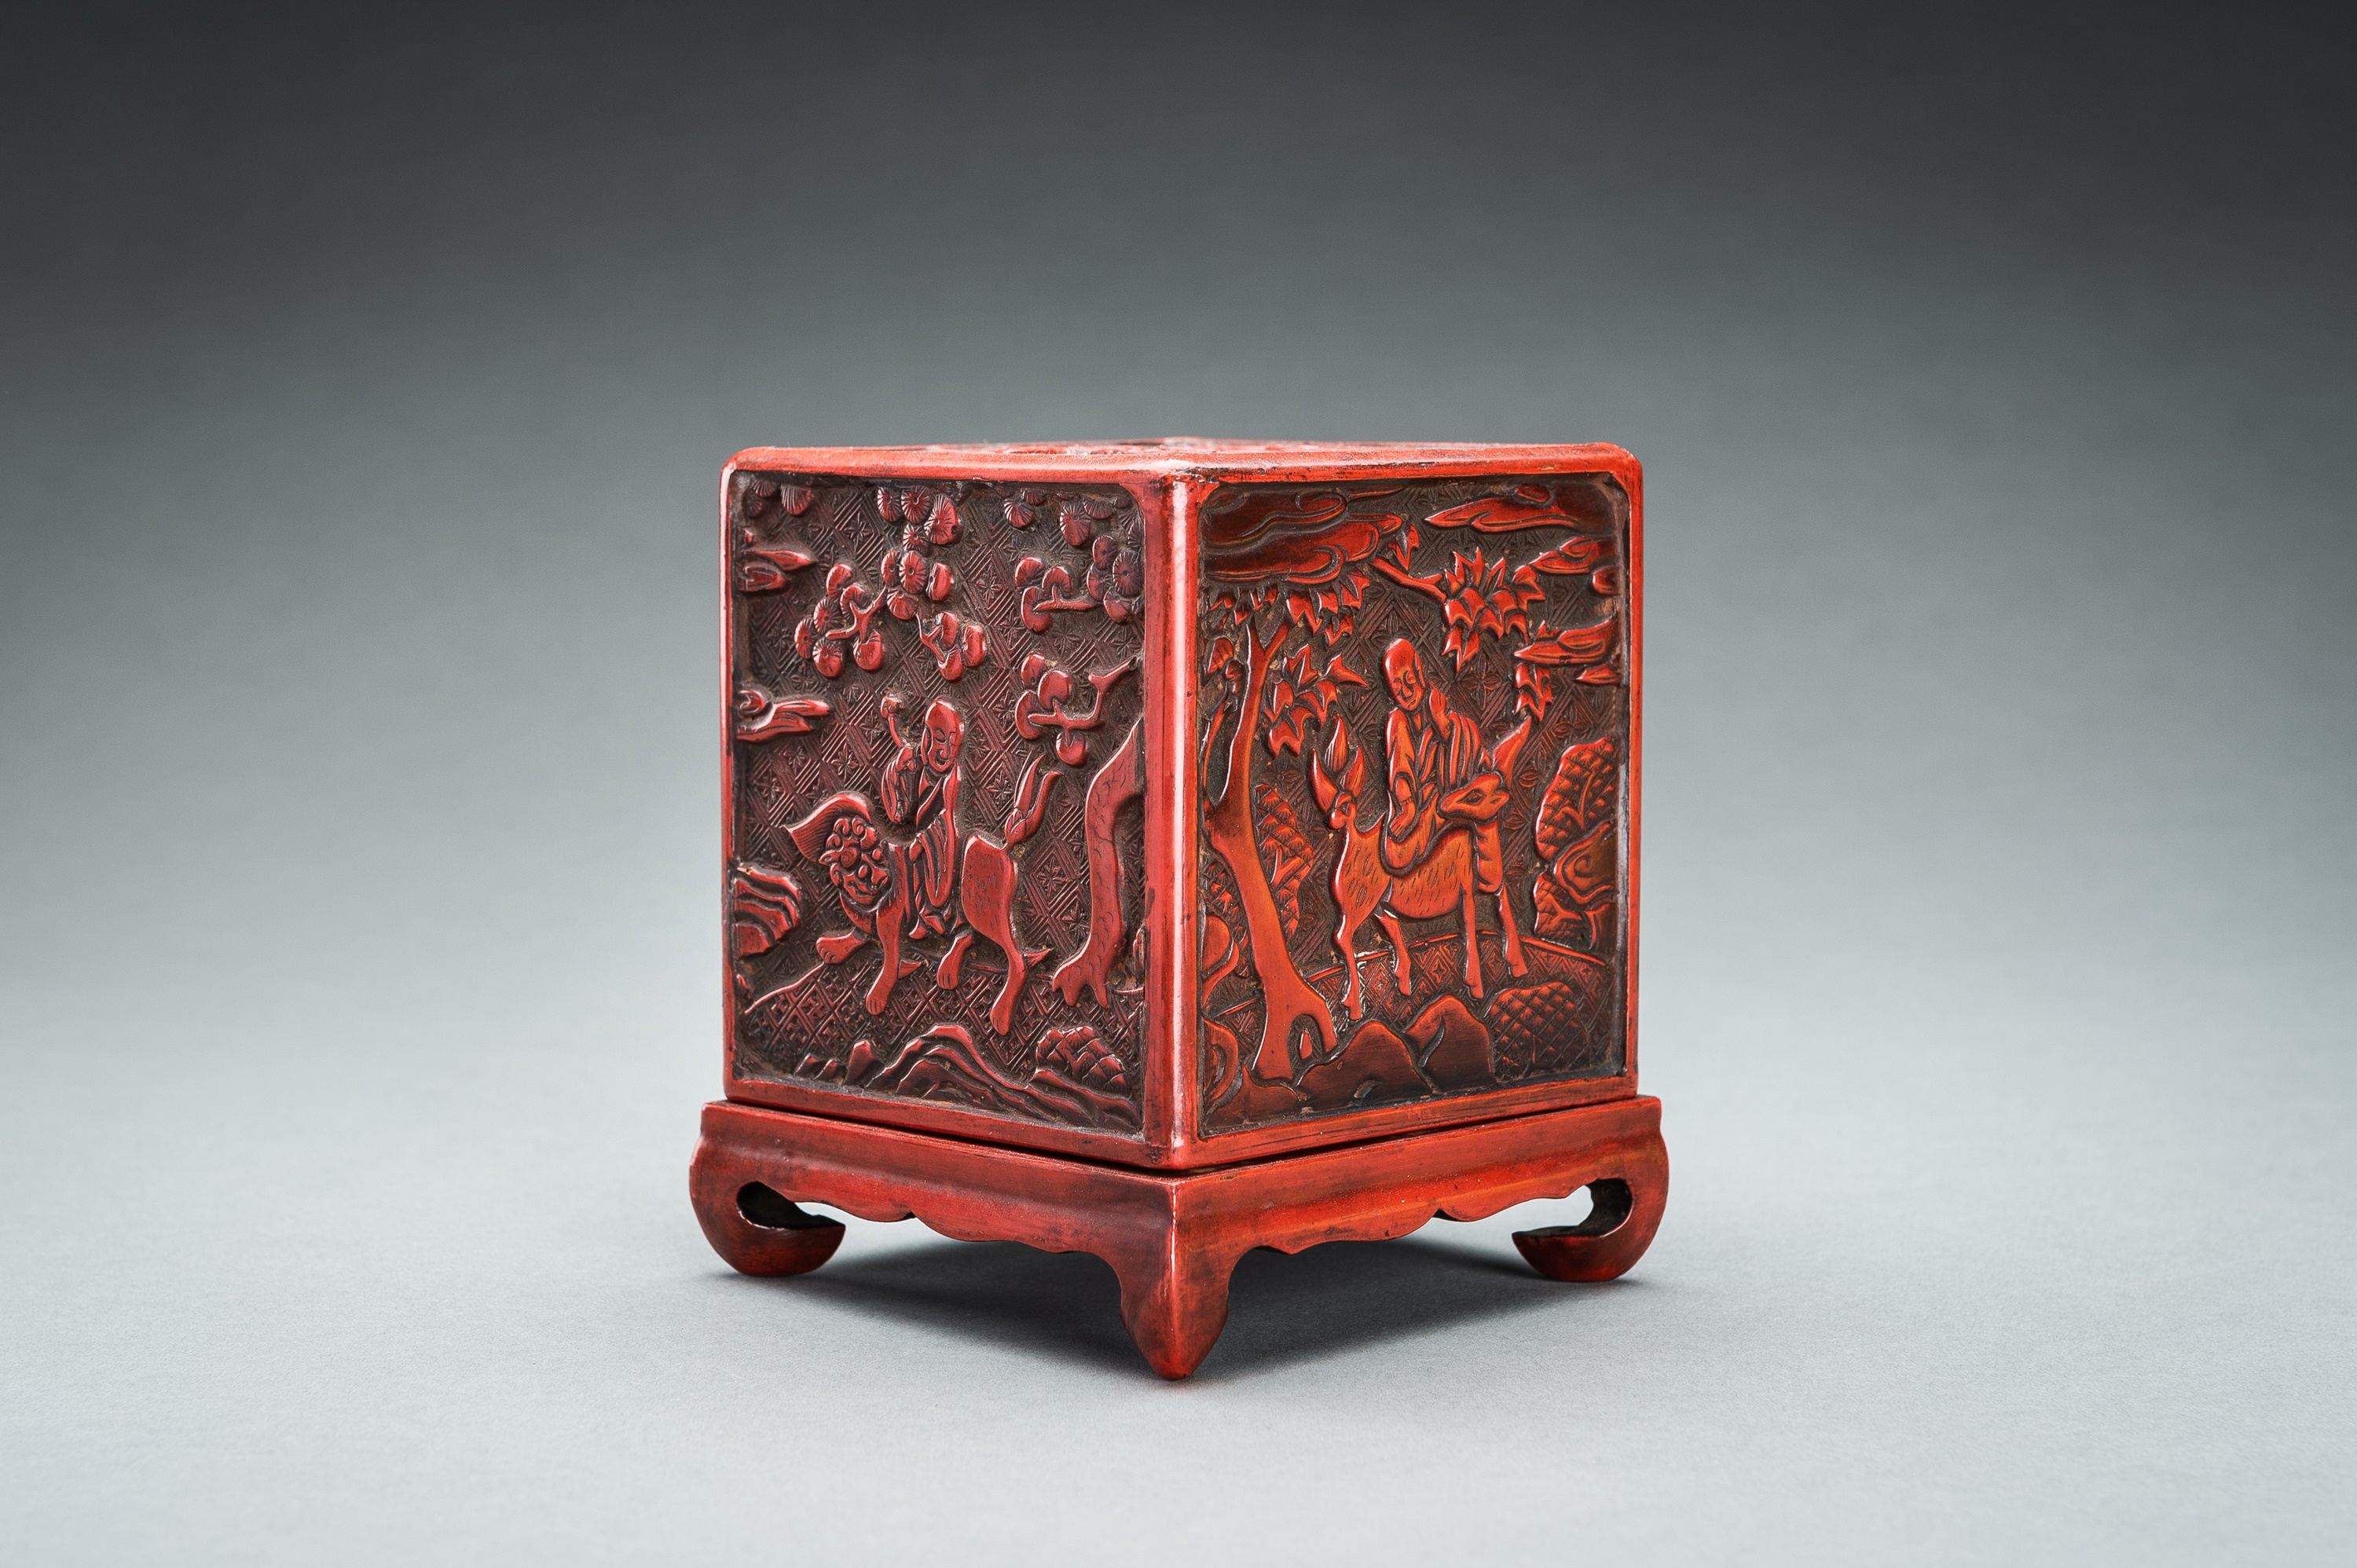 A CINNABAR LACQUER 'IMMORTALS AND BUDAI' BOX AND COVER, QING